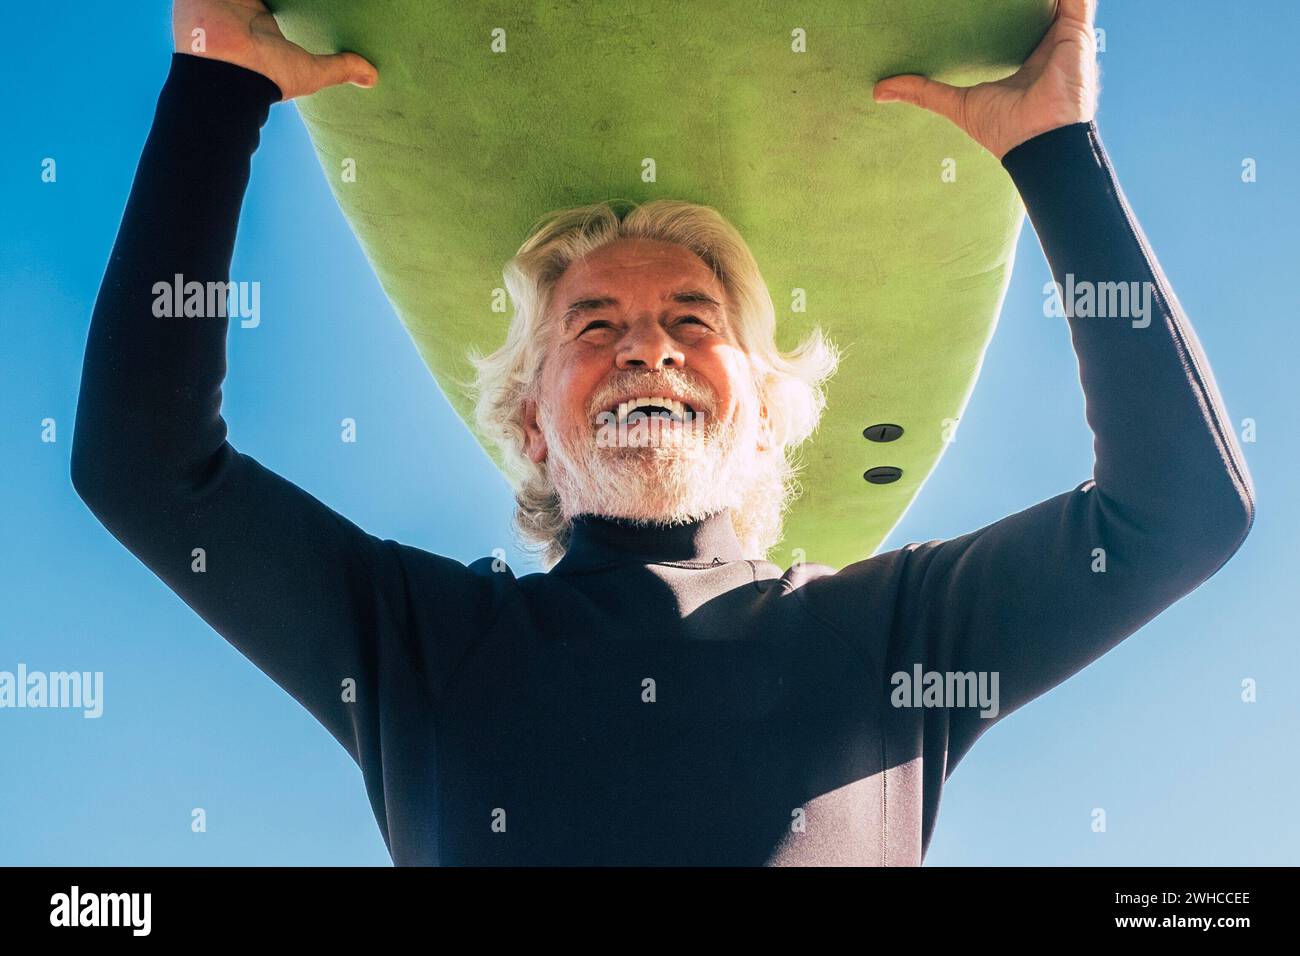 happy senior with surftable on his head is smiling and laughing - old and mature man having fun surfing with a black wetsuits - active retired adult doing activity alone Stock Photo